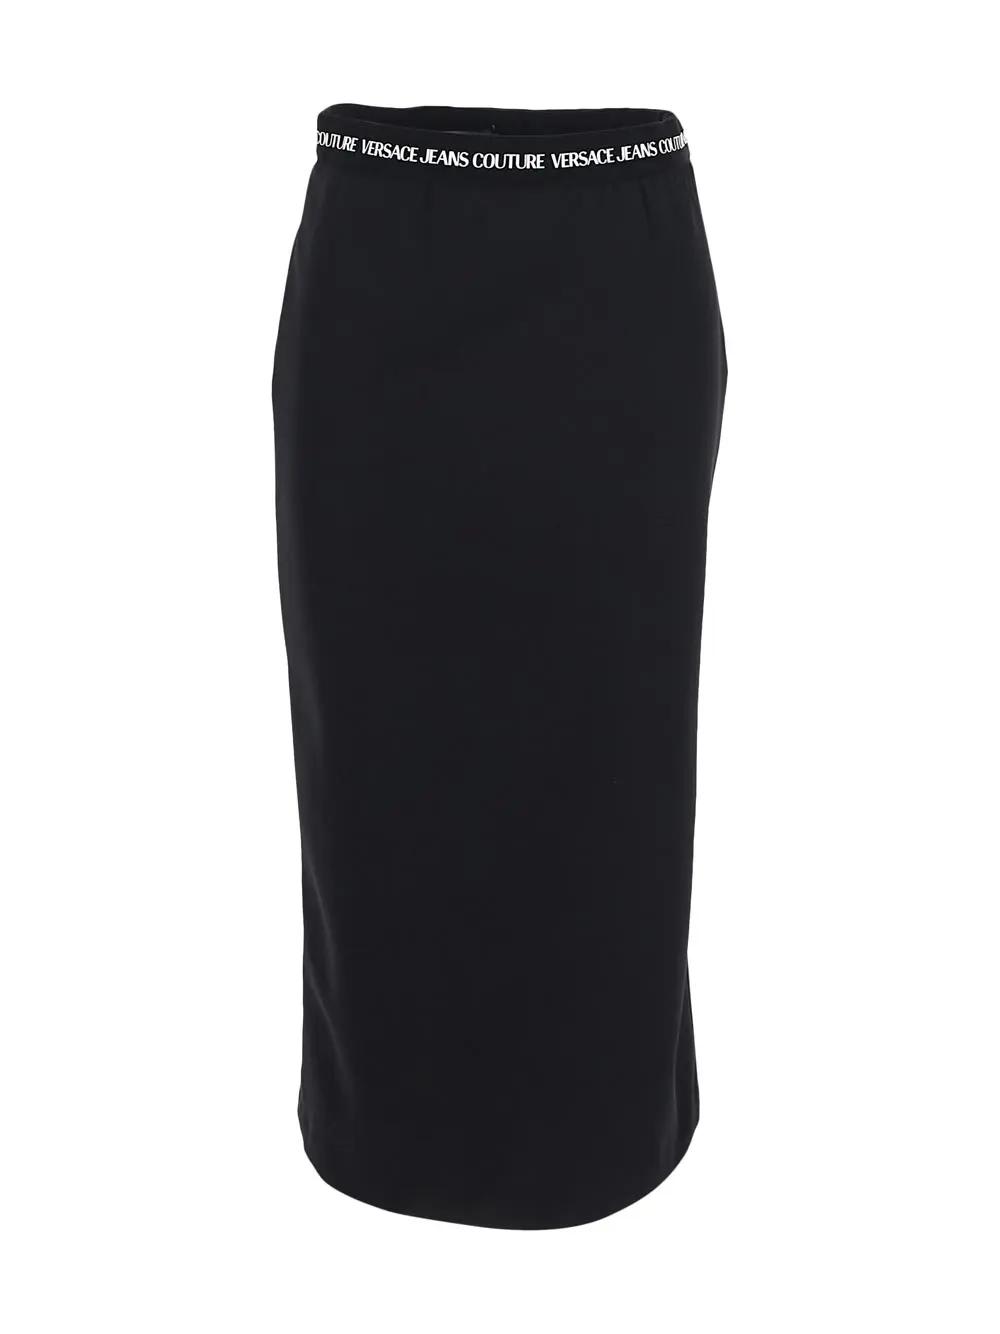 VERSACE JEANS COUTURE PENCIL MIDI SKIRT